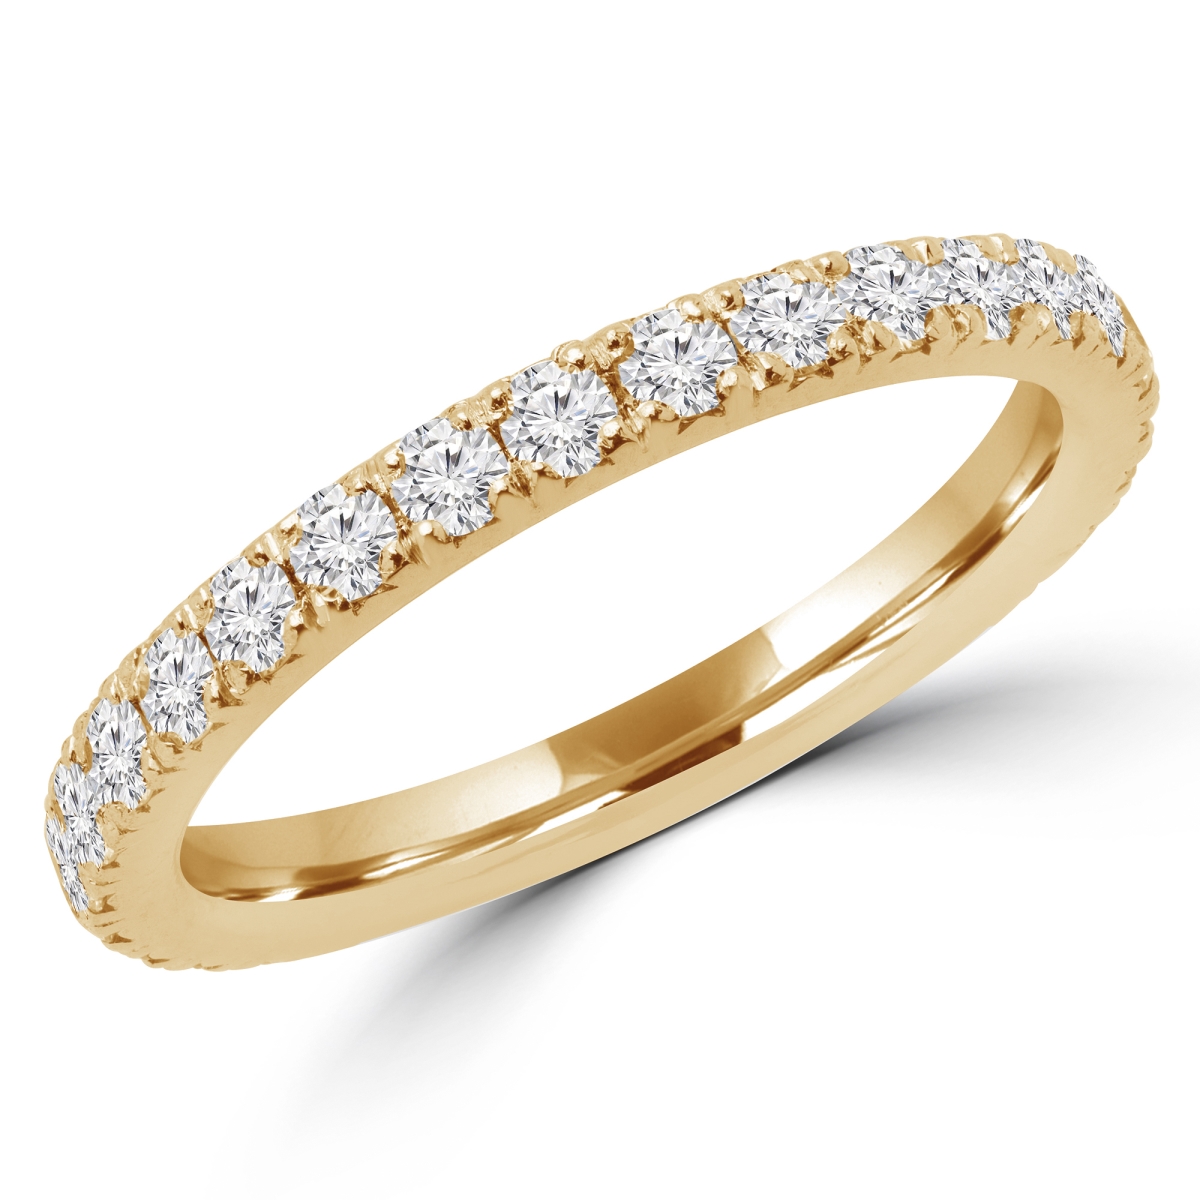 Picture of Majesty Diamonds MD180192-3 0.6 CTW Round Diamond Semi-Eternity Wedding Band Ring in 14K Yellow Gold - Size 3